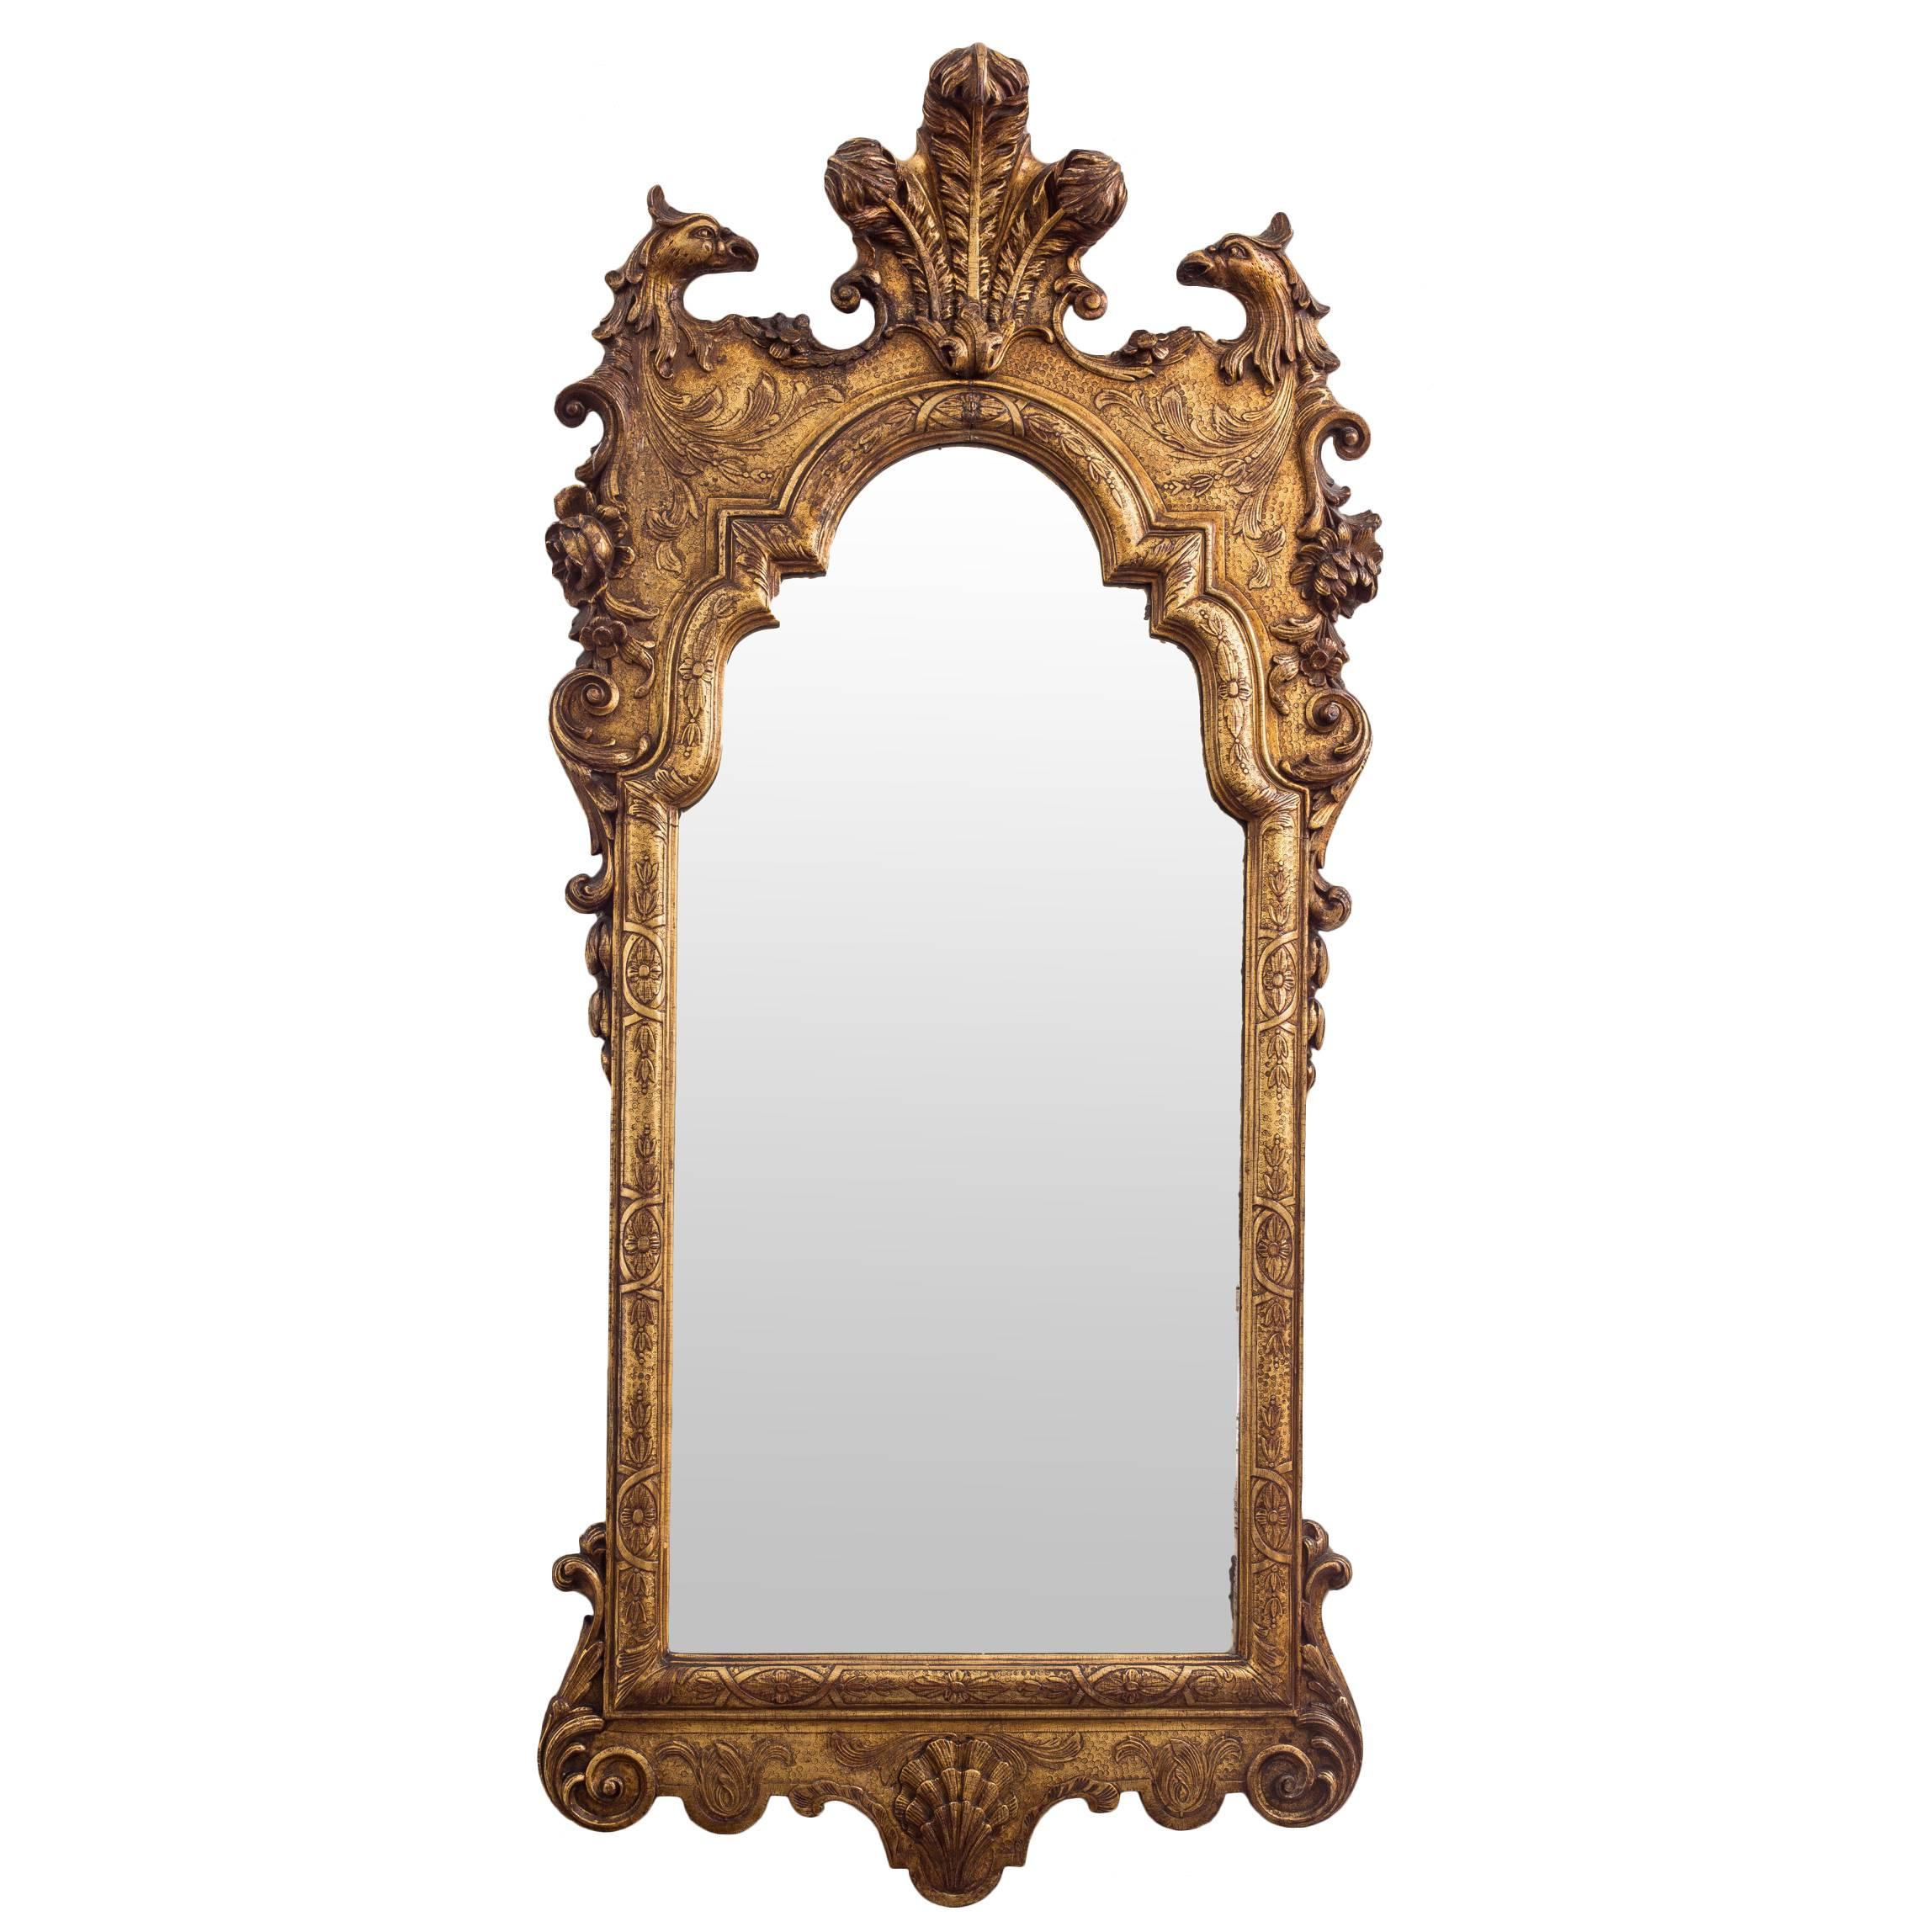 George I Mantel Mirrors and Fireplace Mirrors